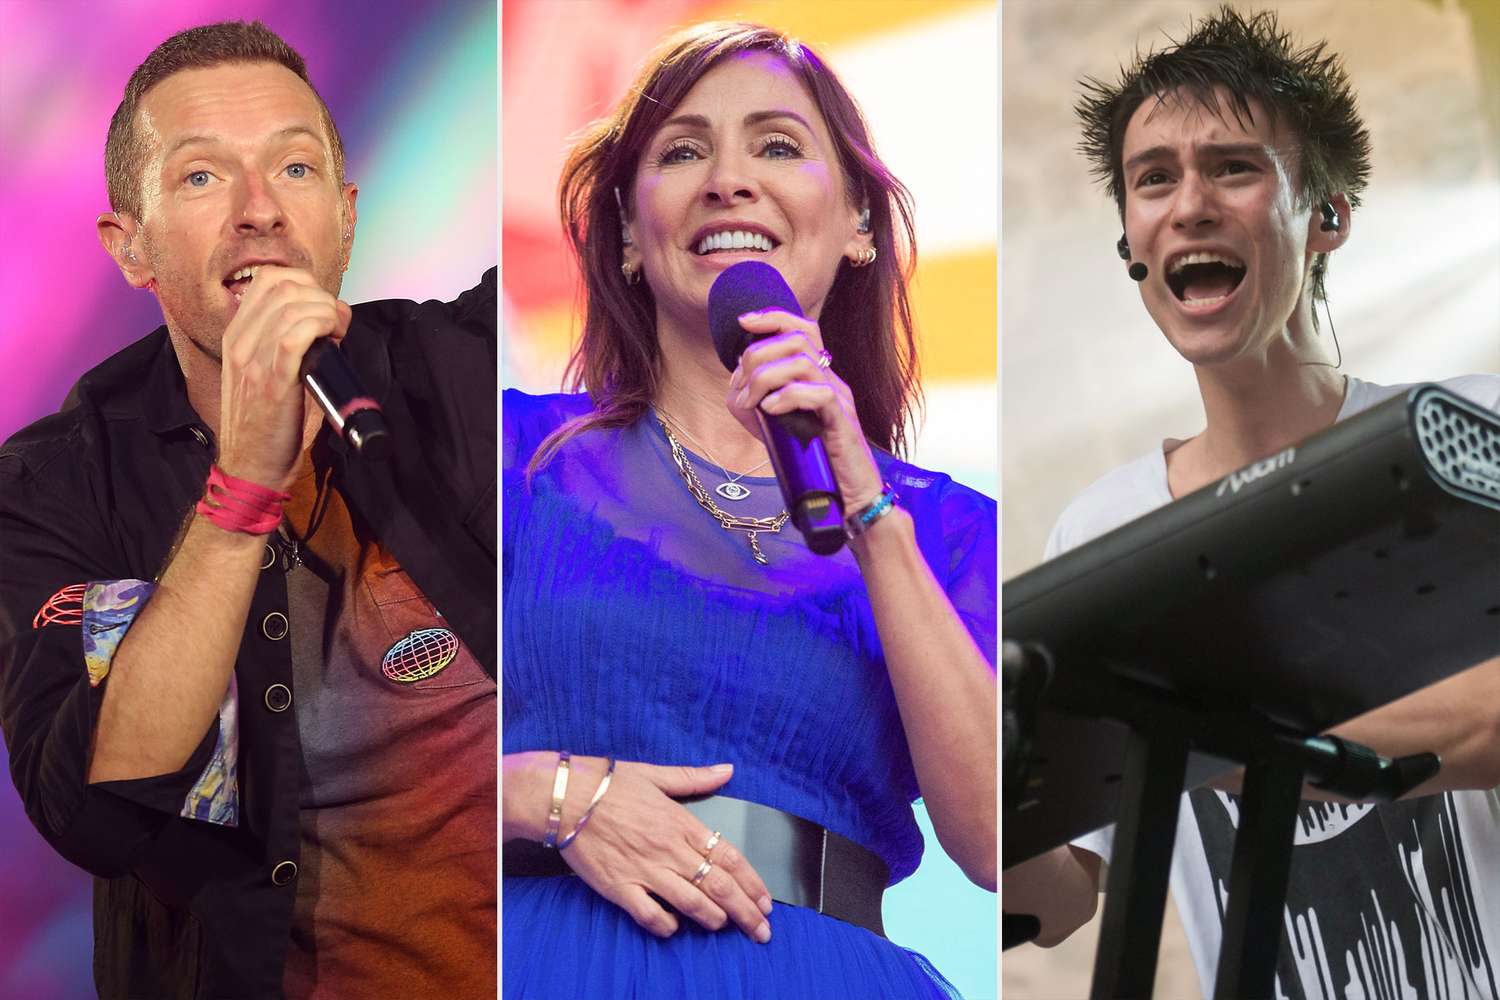 Coldplay, Natalie Imbruglia and Jacob Collier performed "Summer Nights" in honor of Olivia Newton-John at Coldplay's concert last night.